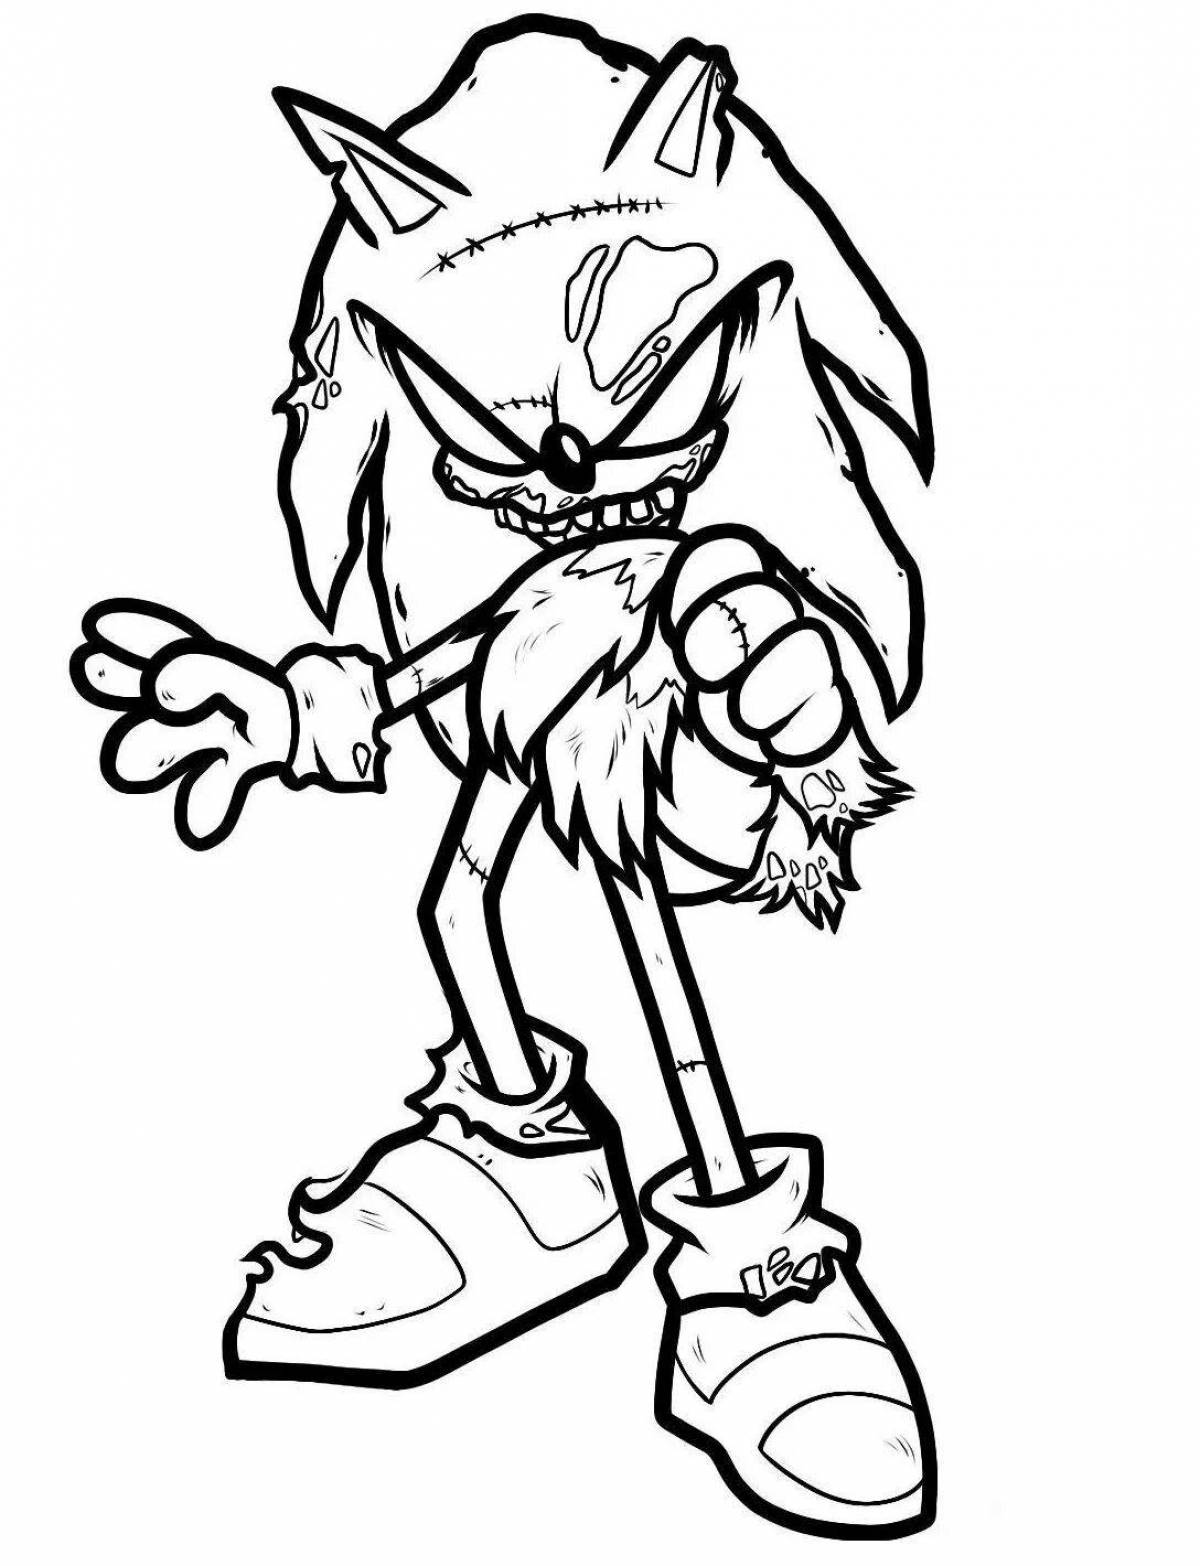 Macab sonic coloring page